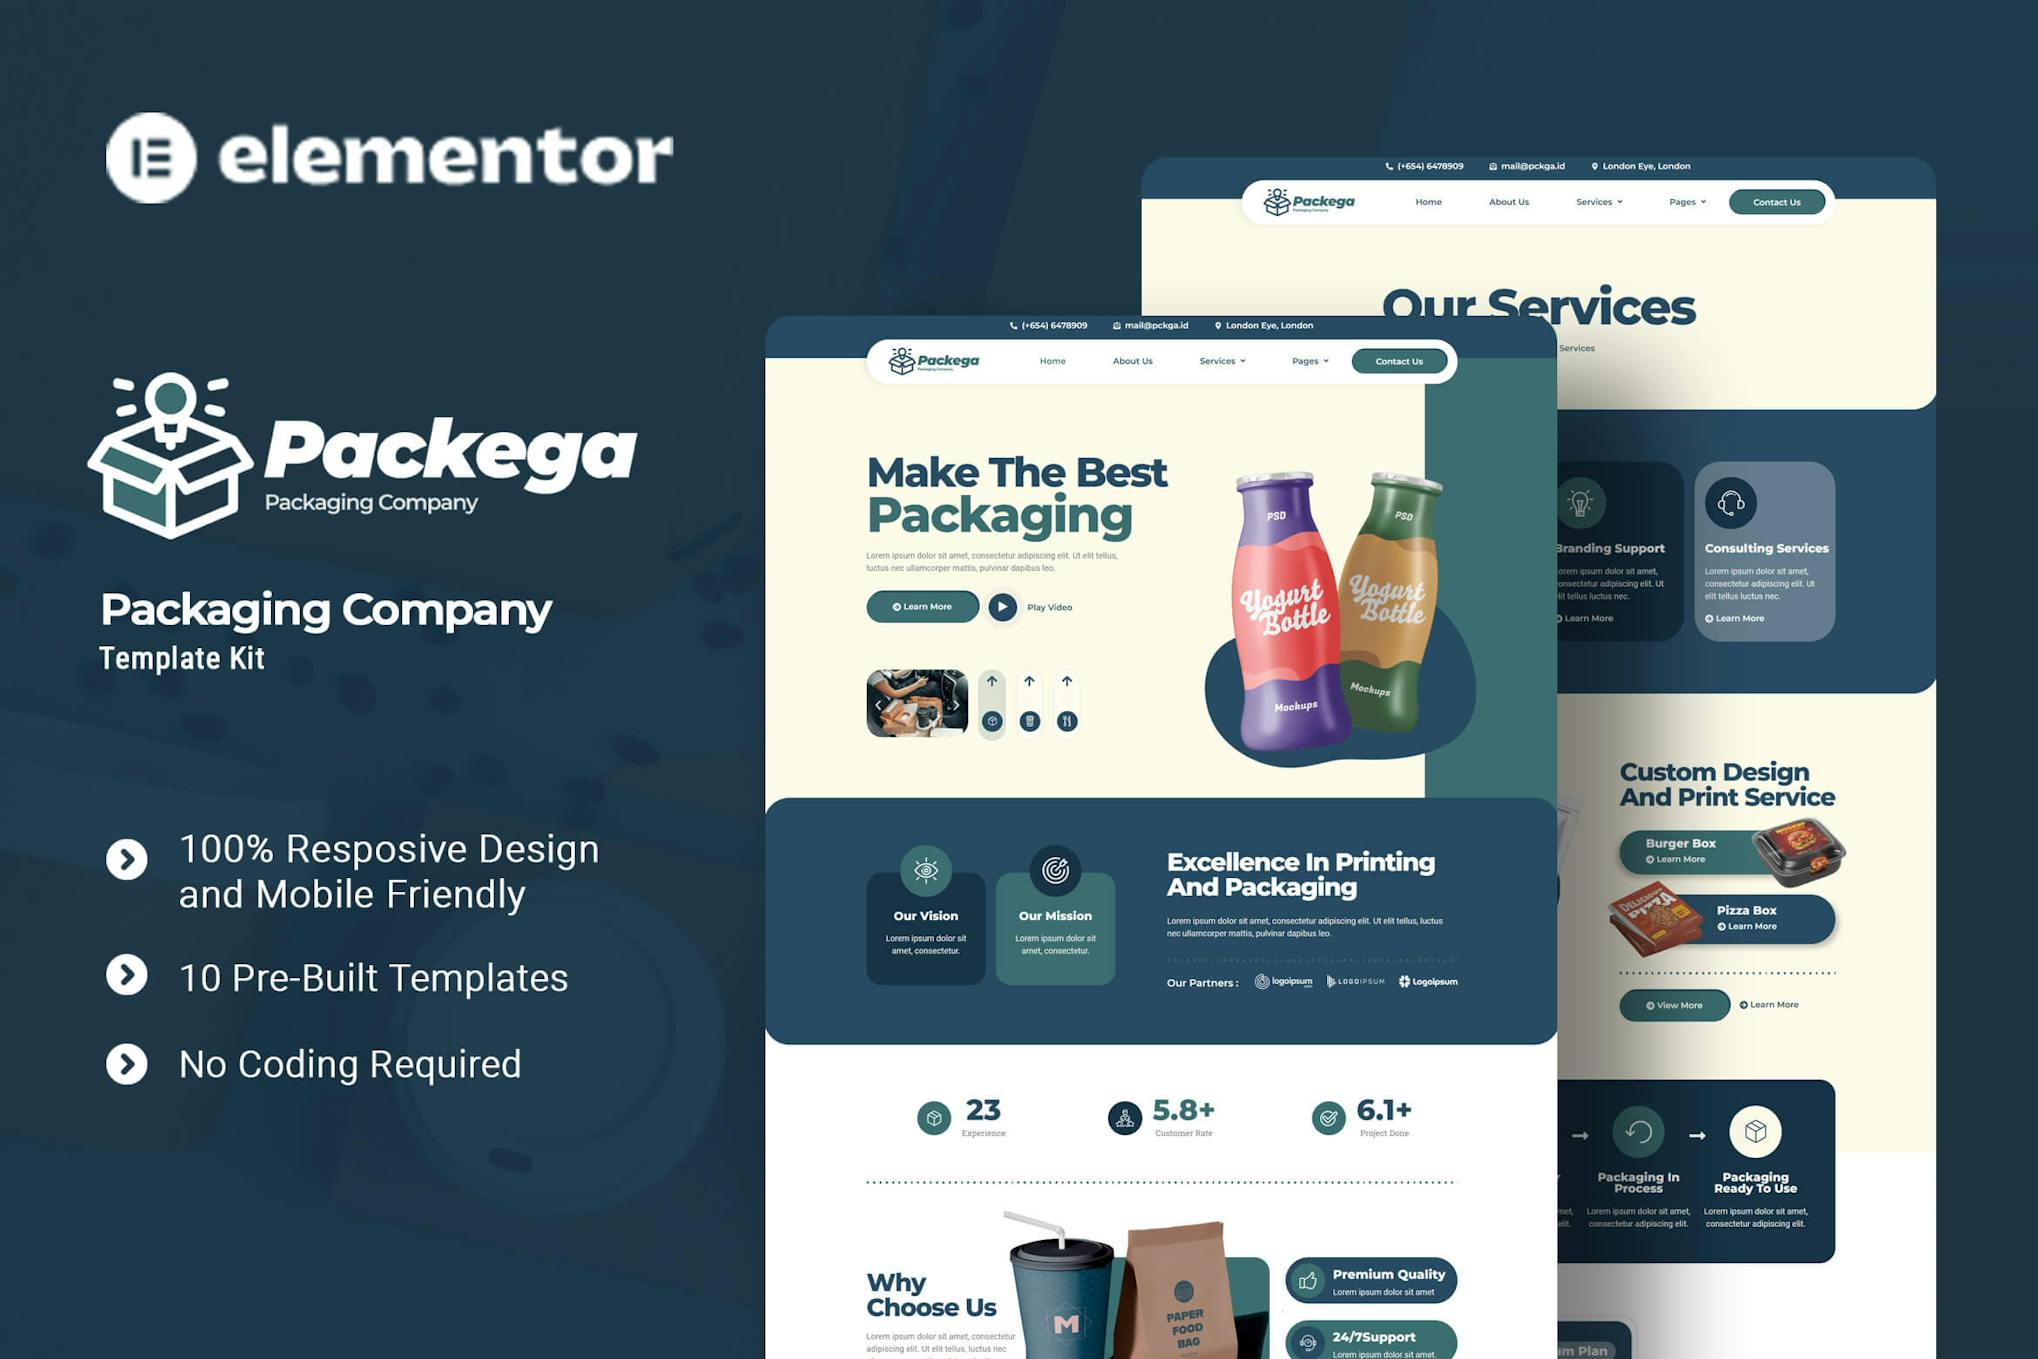 Download Packega - Packaging Company Elementor Template Kit